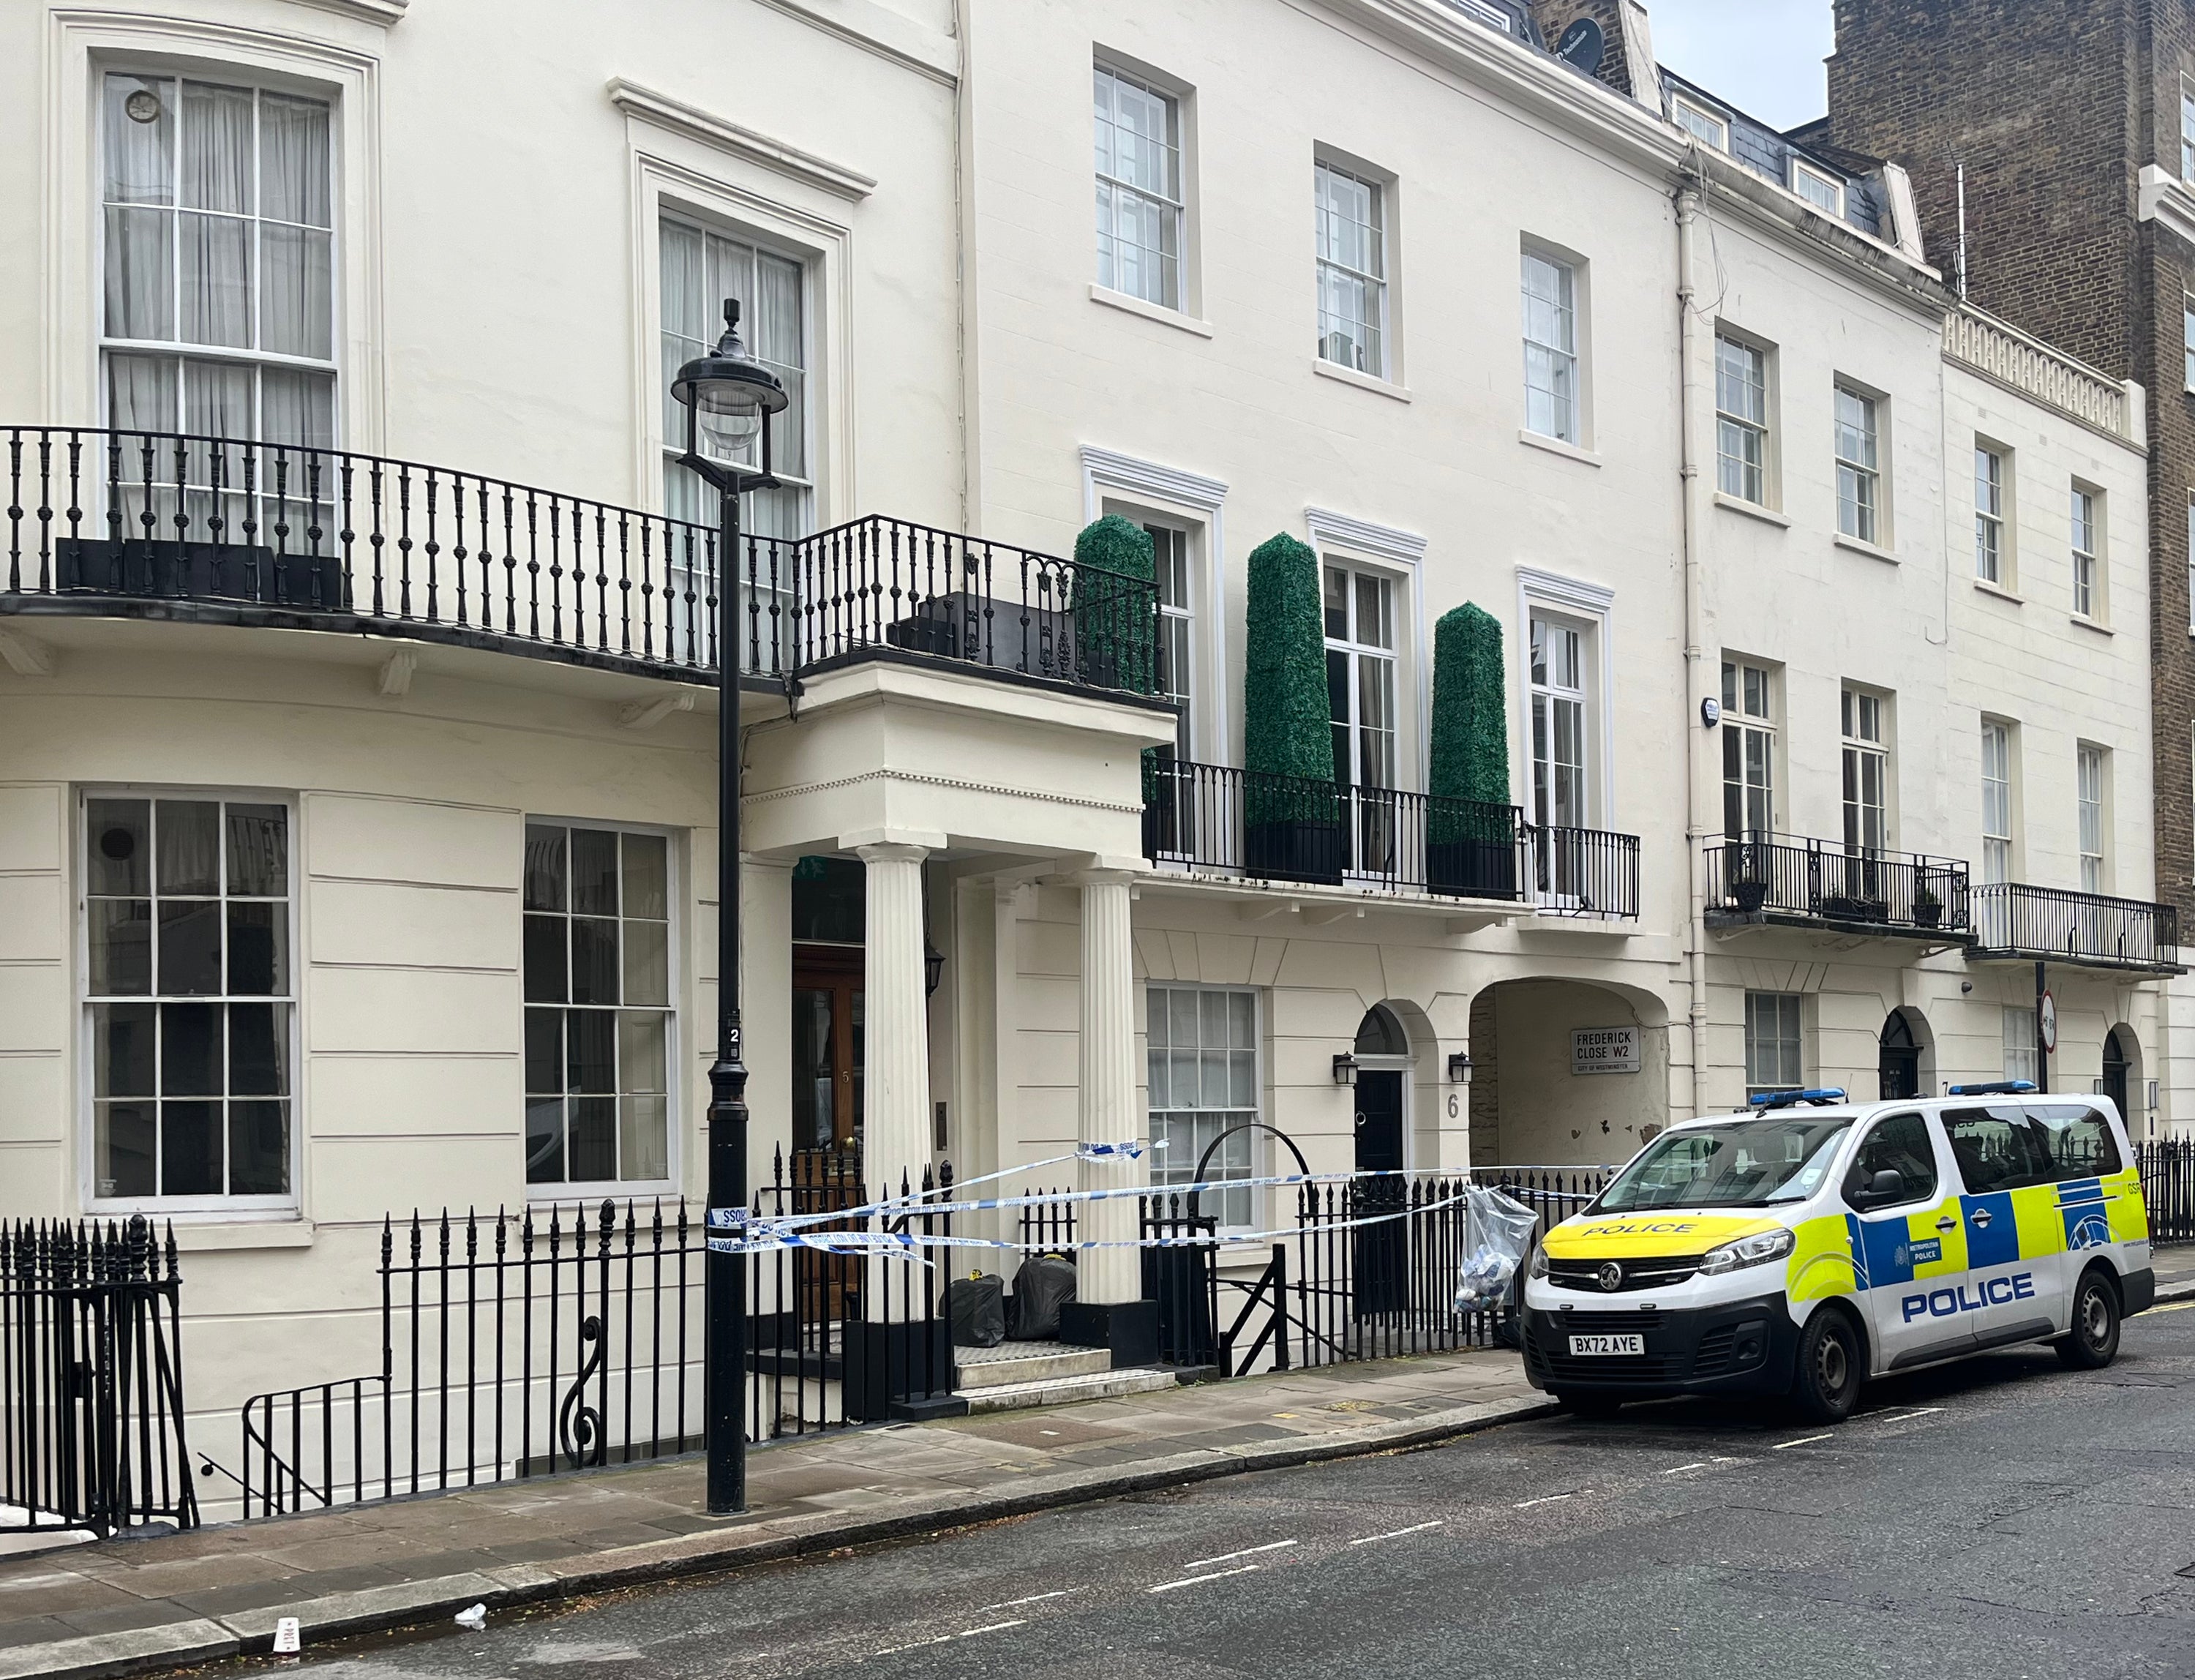 The scene on Stanhope Place, Bayswater, where a murder investigation is under way